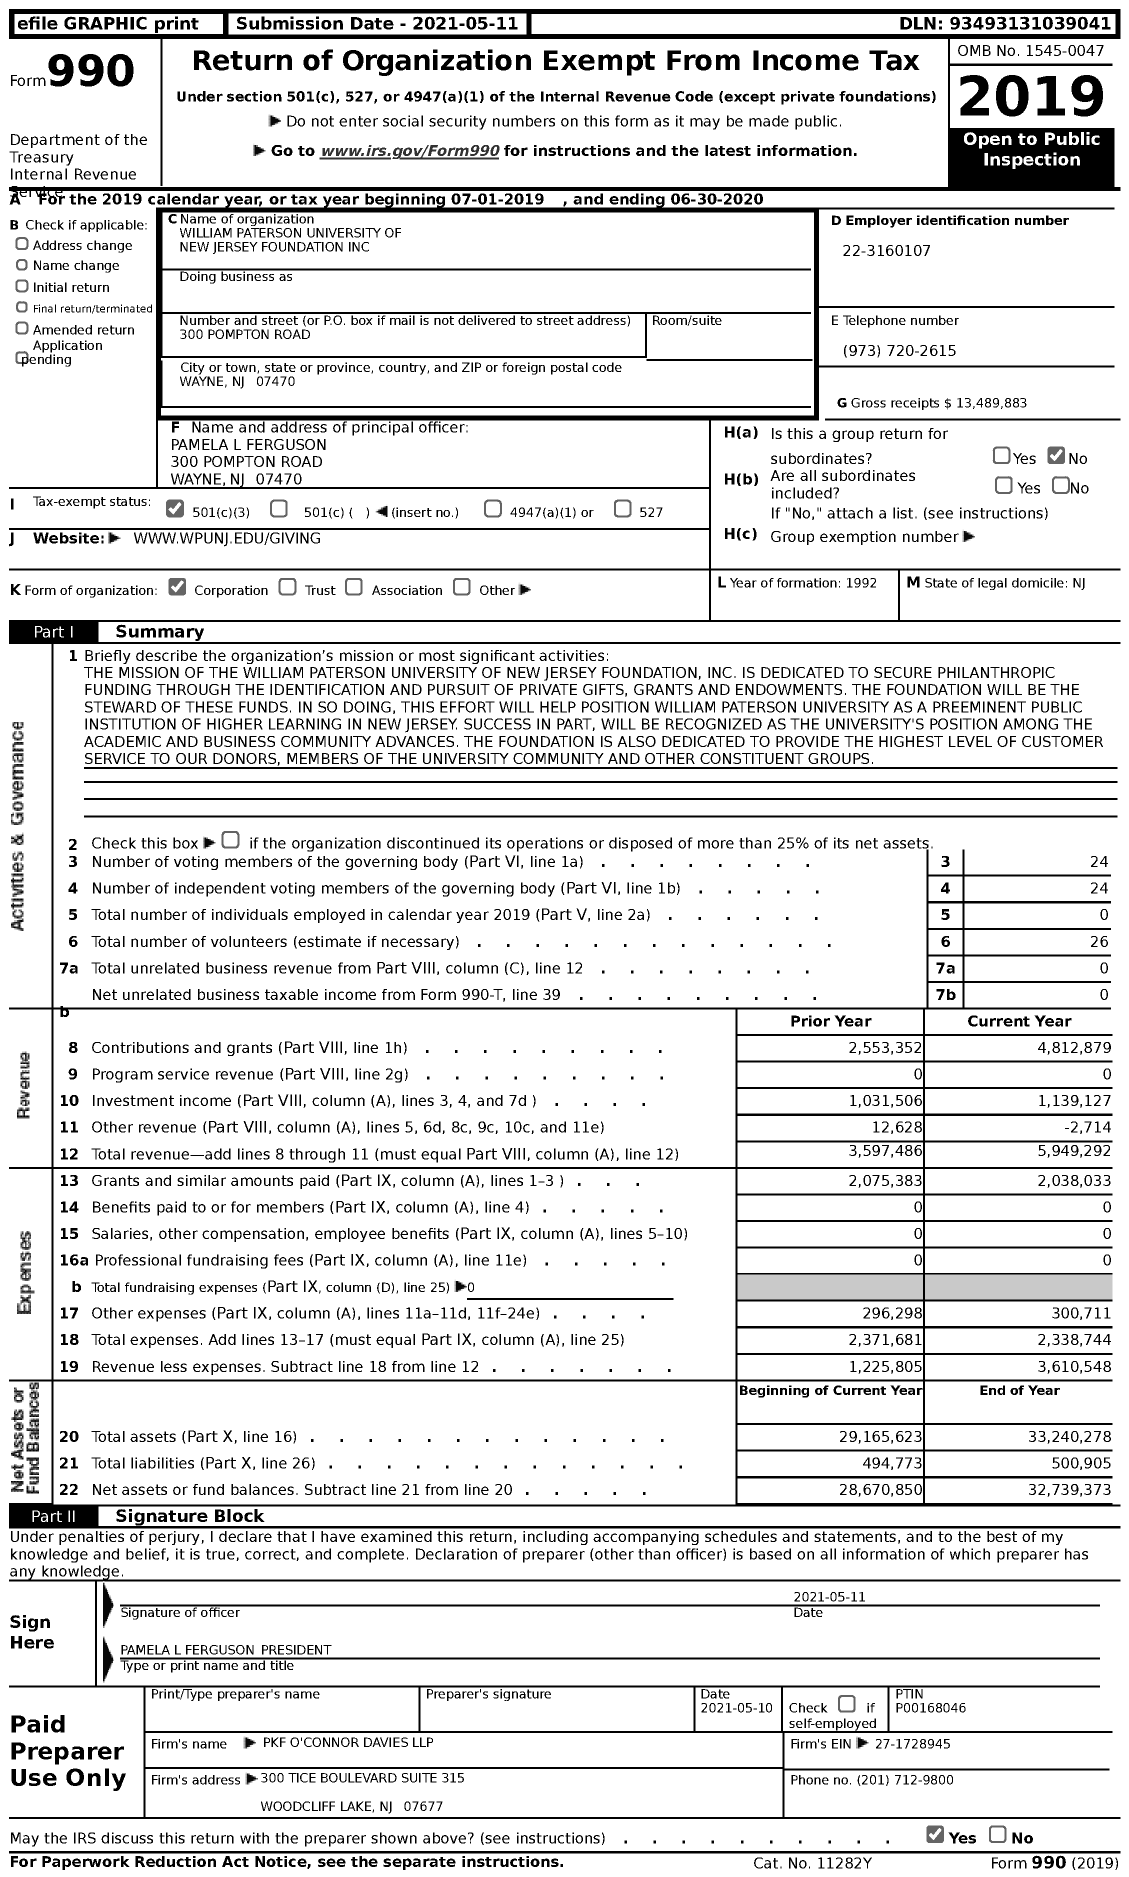 Image of first page of 2019 Form 990 for The William Paterson University of New Jersey (WPUNJ)